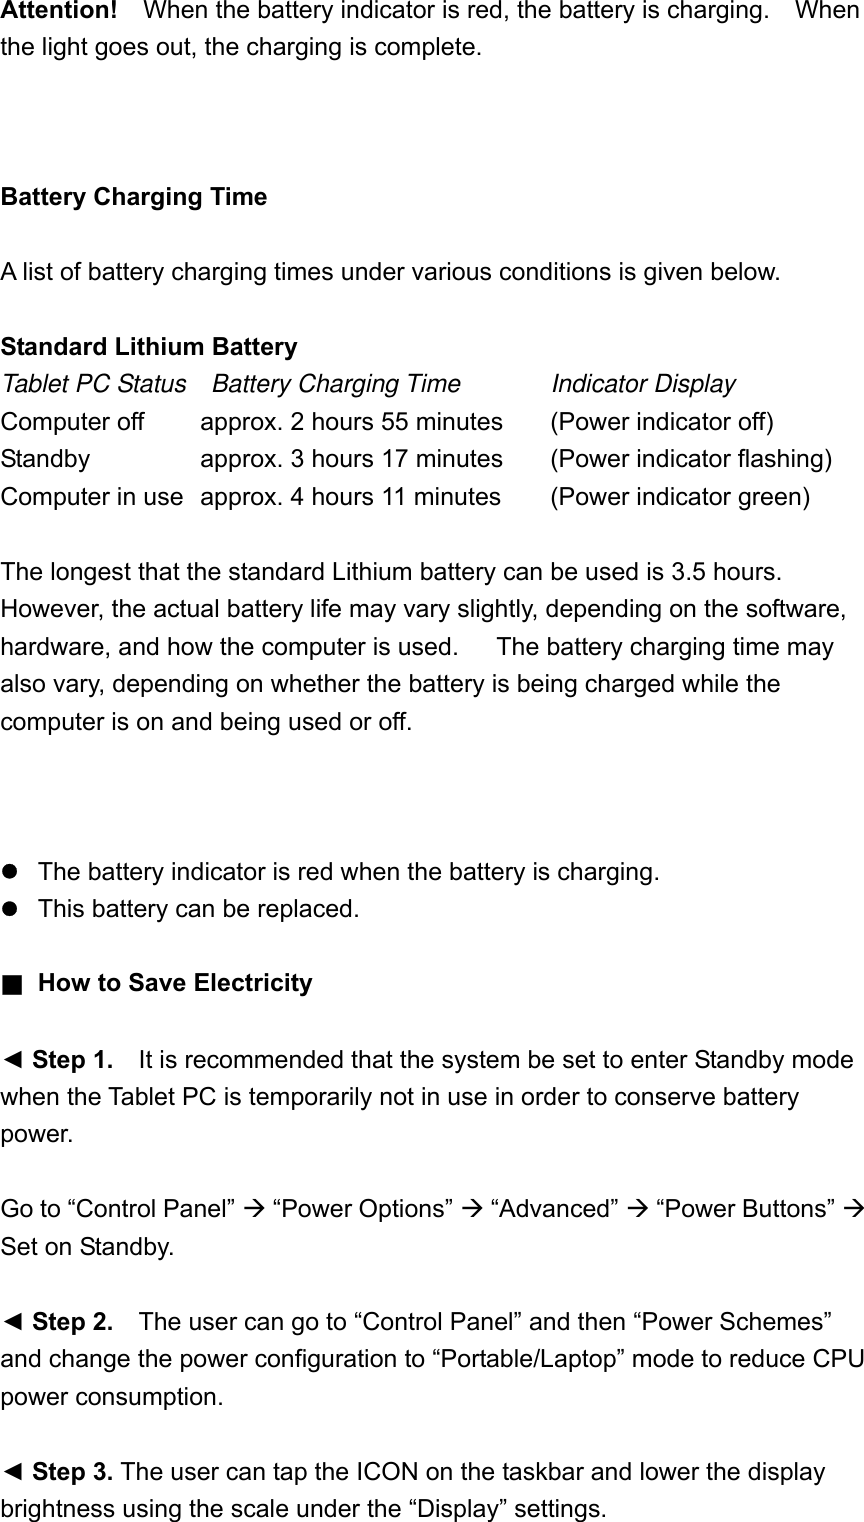 Attention!  When the battery indicator is red, the battery is charging.    When the light goes out, the charging is complete.    Battery Charging Time  A list of battery charging times under various conditions is given below.  Standard Lithium Battery Tablet PC Status  Battery Charging Time   Indicator Display Computer off      approx. 2 hours 55 minutes    (Power indicator off) Standby      approx. 3 hours 17 minutes  (Power indicator flashing) Computer in use   approx. 4 hours 11 minutes  (Power indicator green)  The longest that the standard Lithium battery can be used is 3.5 hours.   However, the actual battery life may vary slightly, depending on the software, hardware, and how the computer is used.      The battery charging time may also vary, depending on whether the battery is being charged while the computer is on and being used or off.         The battery indicator is red when the battery is charging.  This battery can be replaced.  ■  How to Save Electricity    ◄ Step 1.    It is recommended that the system be set to enter Standby mode when the Tablet PC is temporarily not in use in order to conserve battery power.  Go to “Control Panel”  “Power Options”  “Advanced”  “Power Buttons”  Set on Standby.  ◄ Step 2.    The user can go to “Control Panel” and then “Power Schemes” and change the power configuration to “Portable/Laptop” mode to reduce CPU power consumption.  ◄ Step 3. The user can tap the ICON on the taskbar and lower the display brightness using the scale under the “Display” settings.  